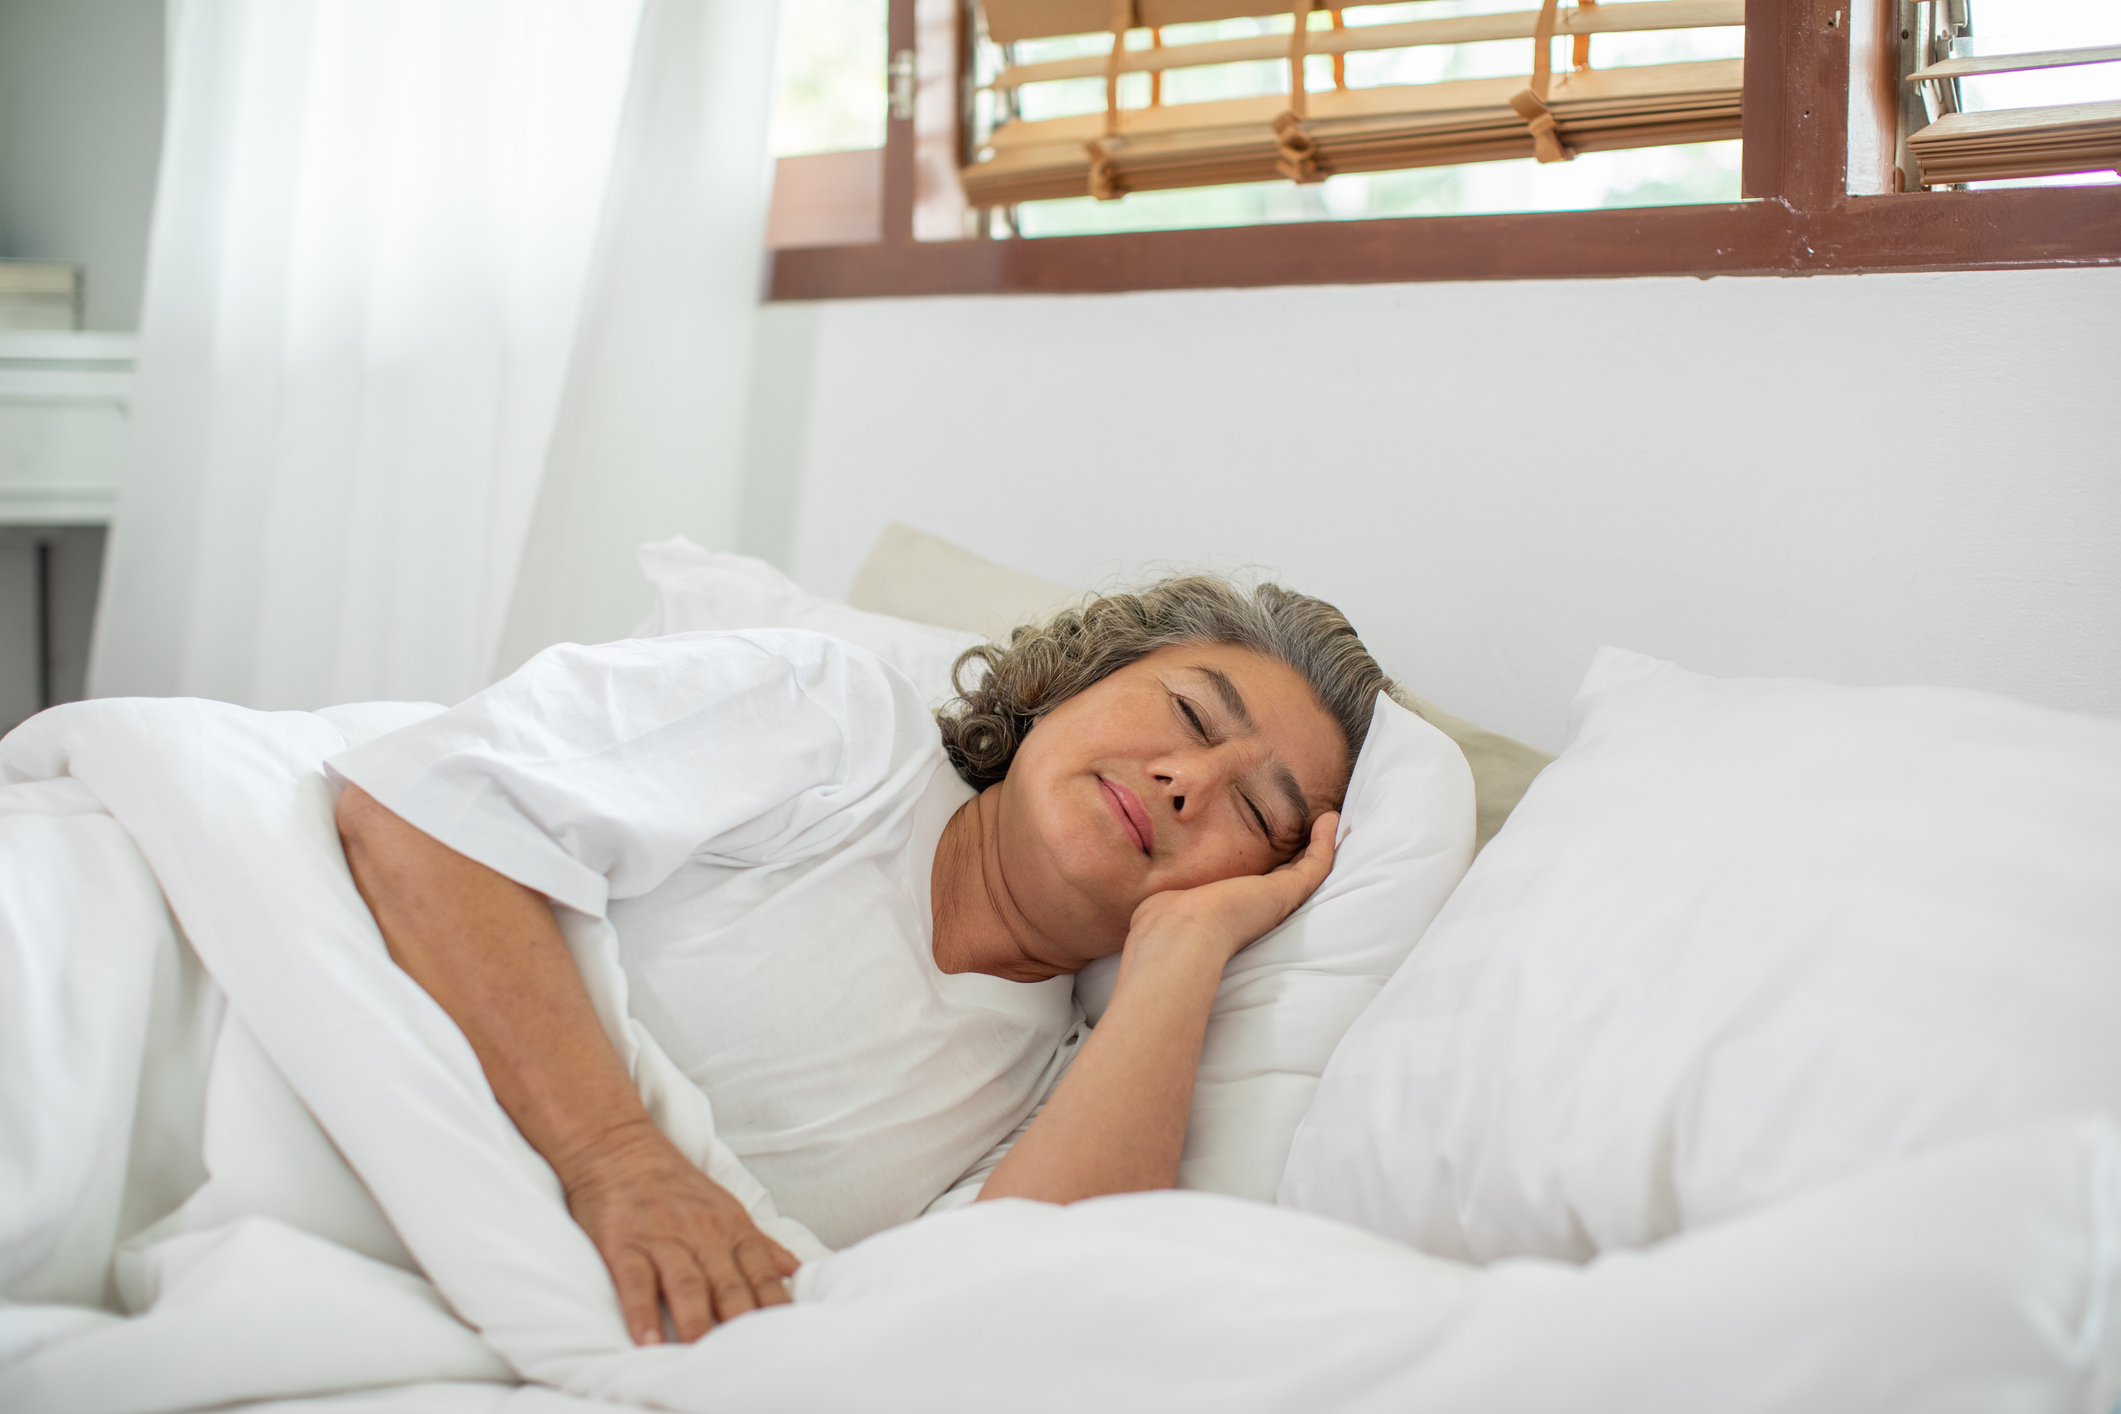 What’s more dangerous, Sleep loss or a high-fat diet?